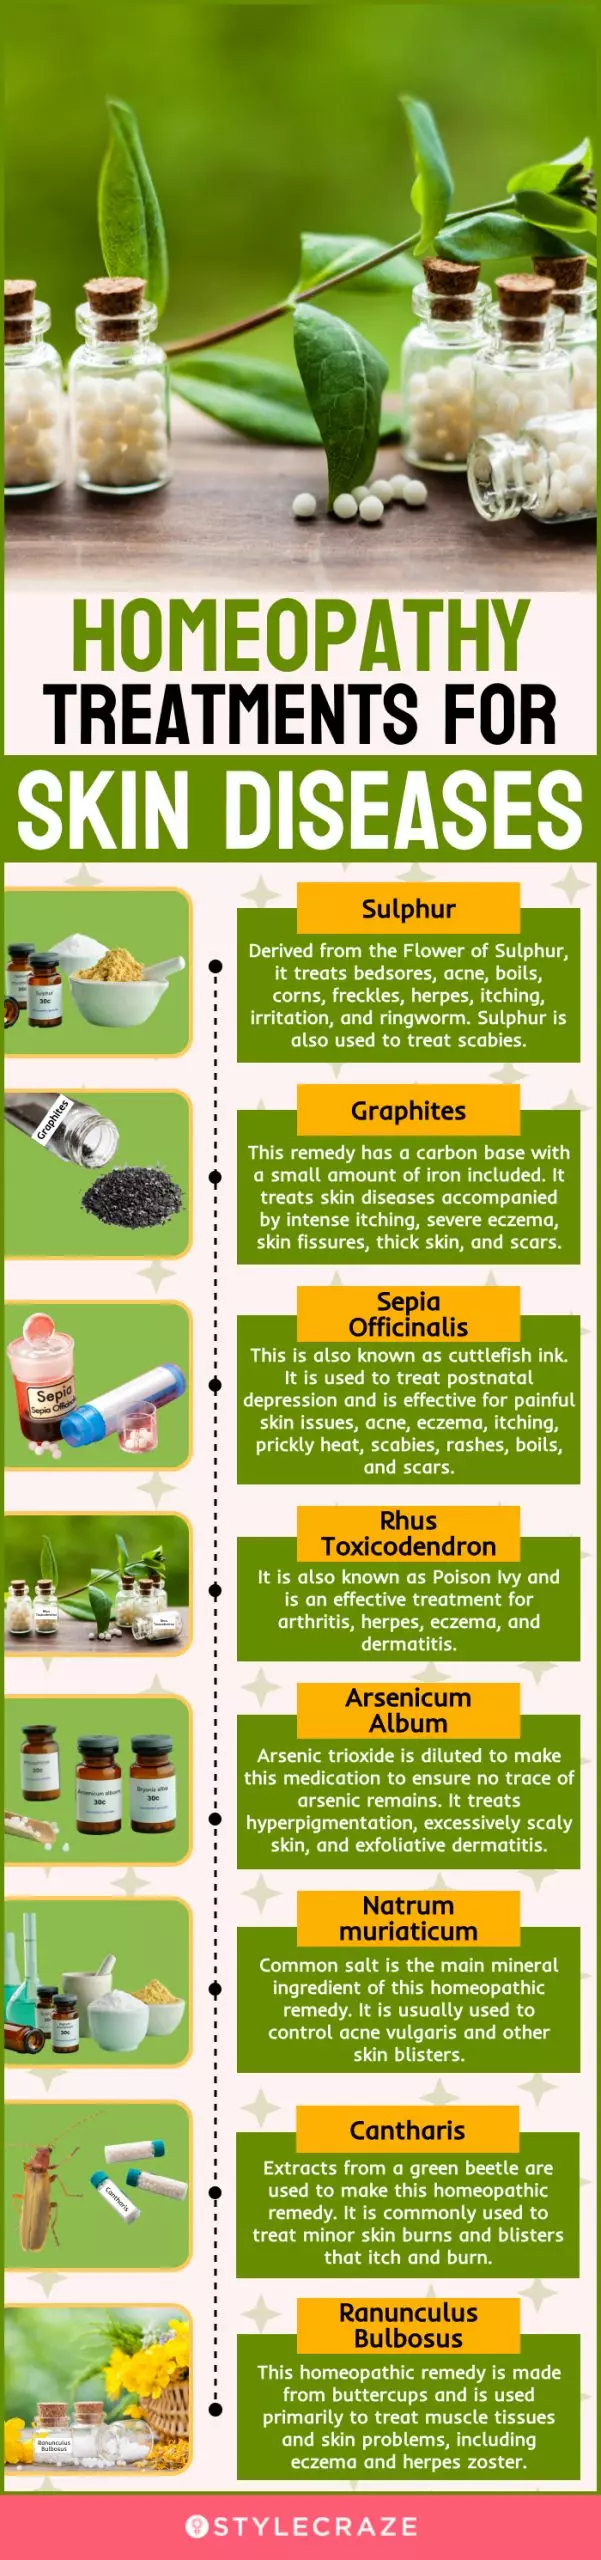 homeopathy treatments for skin diseases (infographic)